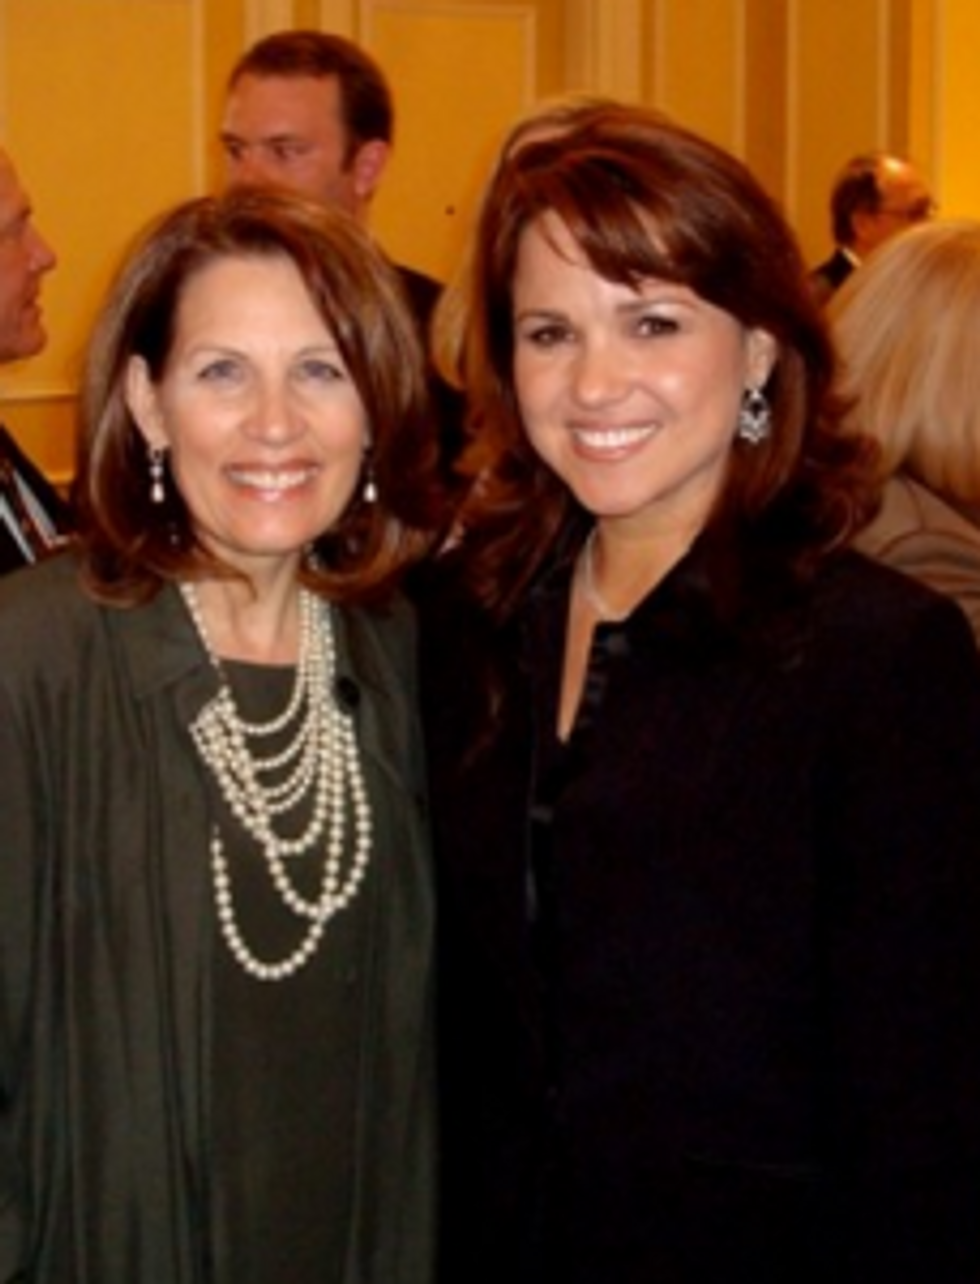 Senate Candidate 'RealChristine' O'Donnell Is Palin of Delaware